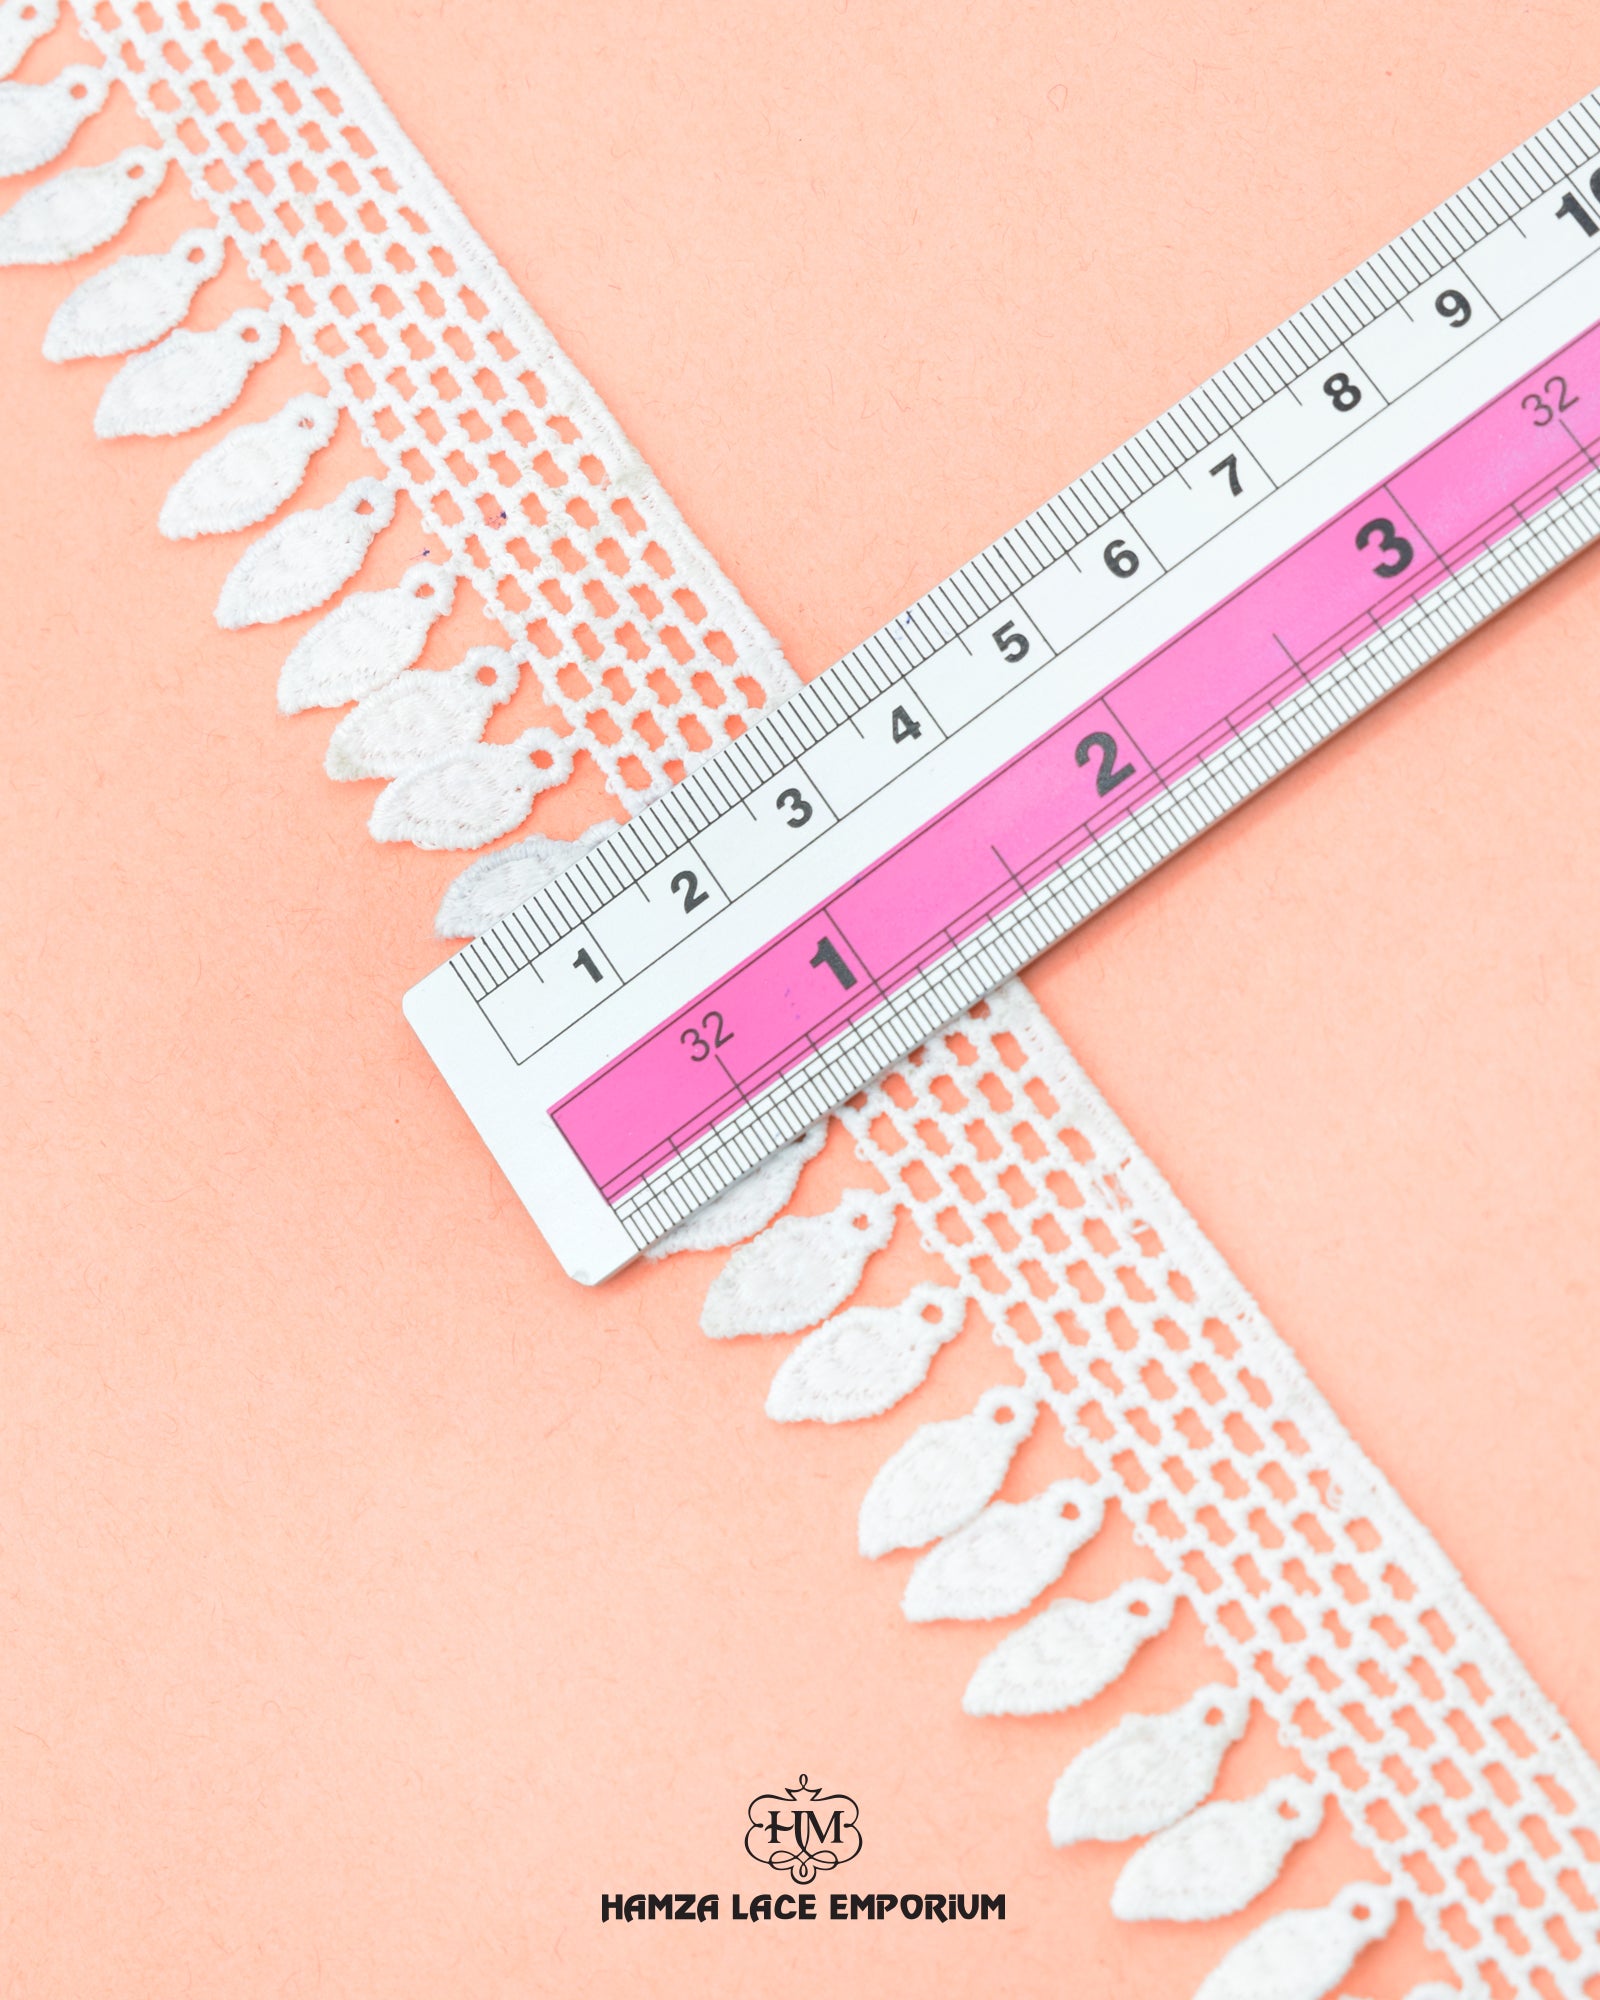 Size of the 'Jhaalar Lace 22489' is shown as '1.5' inches with the help of a ruler